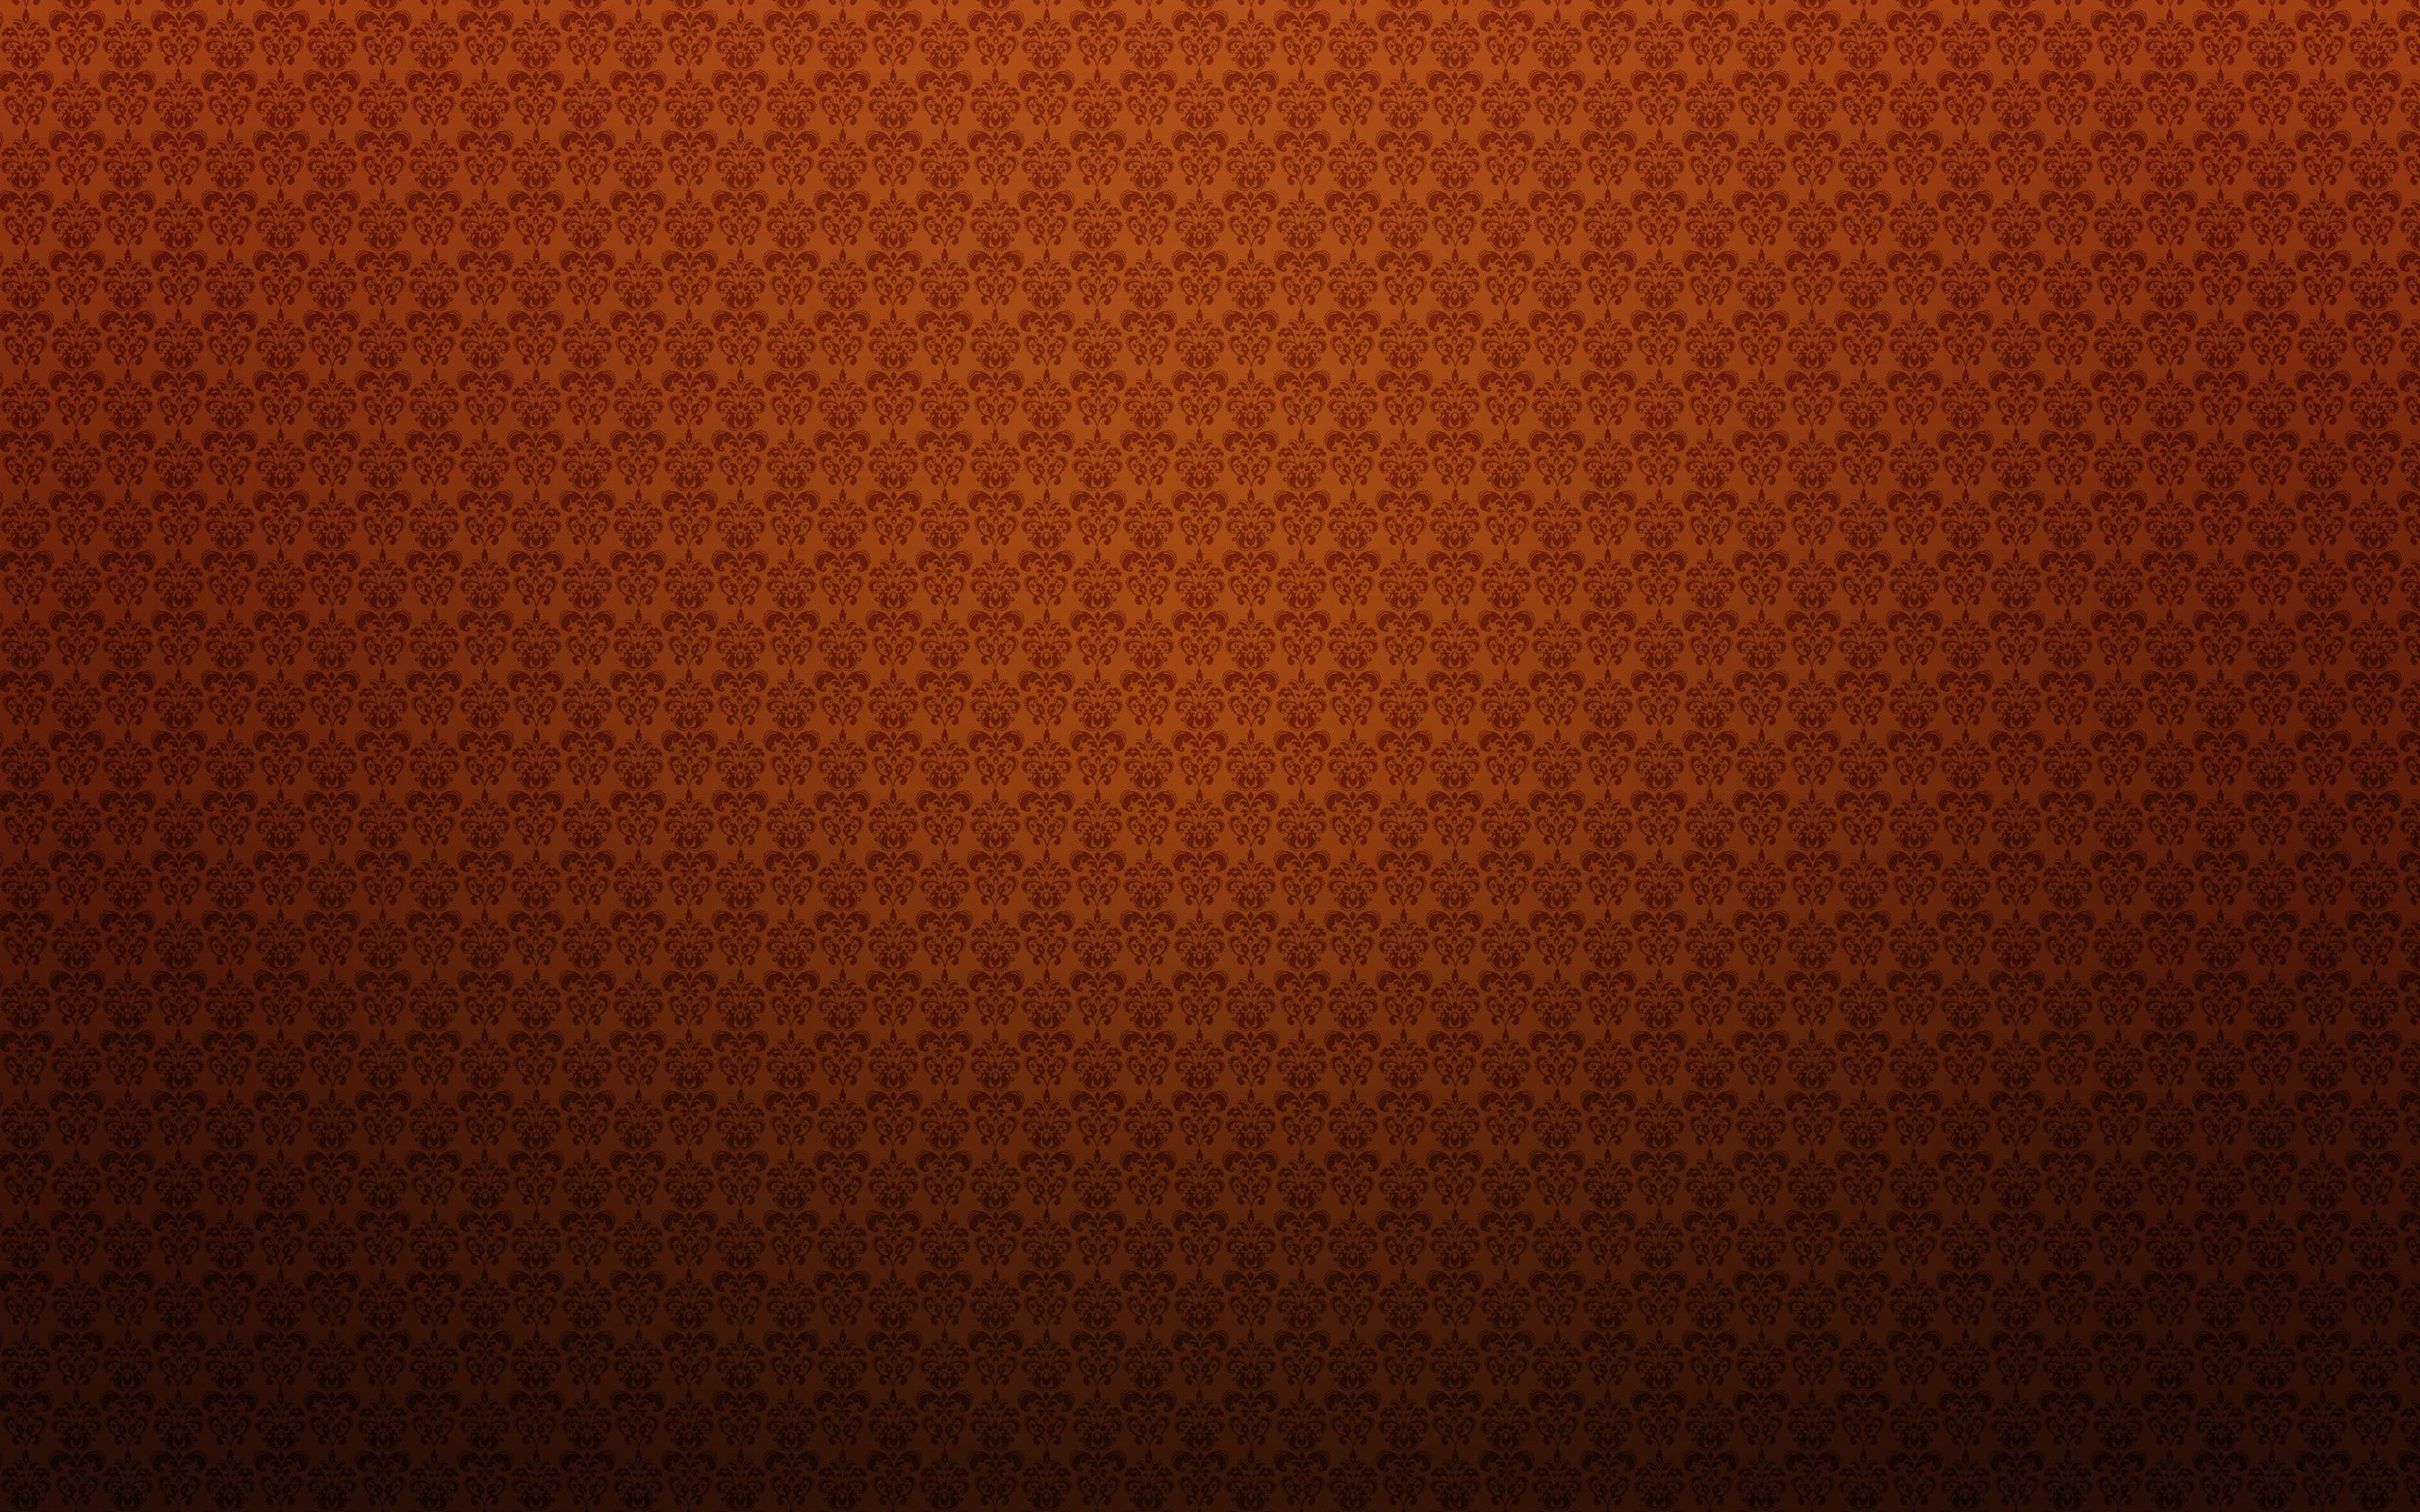 Orange Texture Background HD Wallpapers | HD Wallpapers